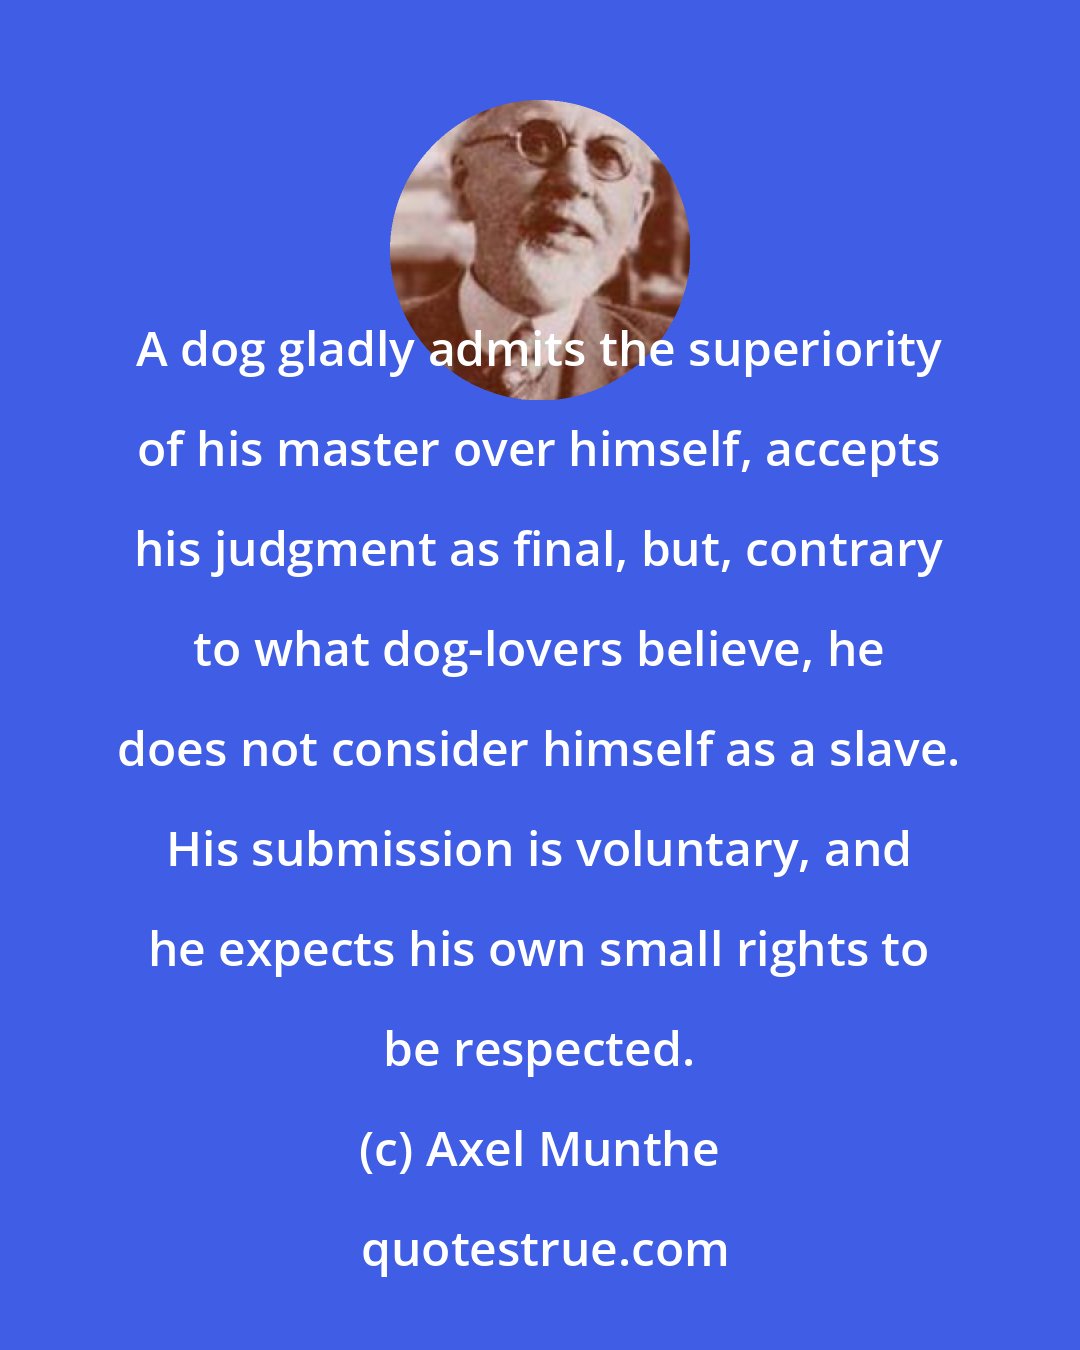 Axel Munthe: A dog gladly admits the superiority of his master over himself, accepts his judgment as final, but, contrary to what dog-lovers believe, he does not consider himself as a slave. His submission is voluntary, and he expects his own small rights to be respected.